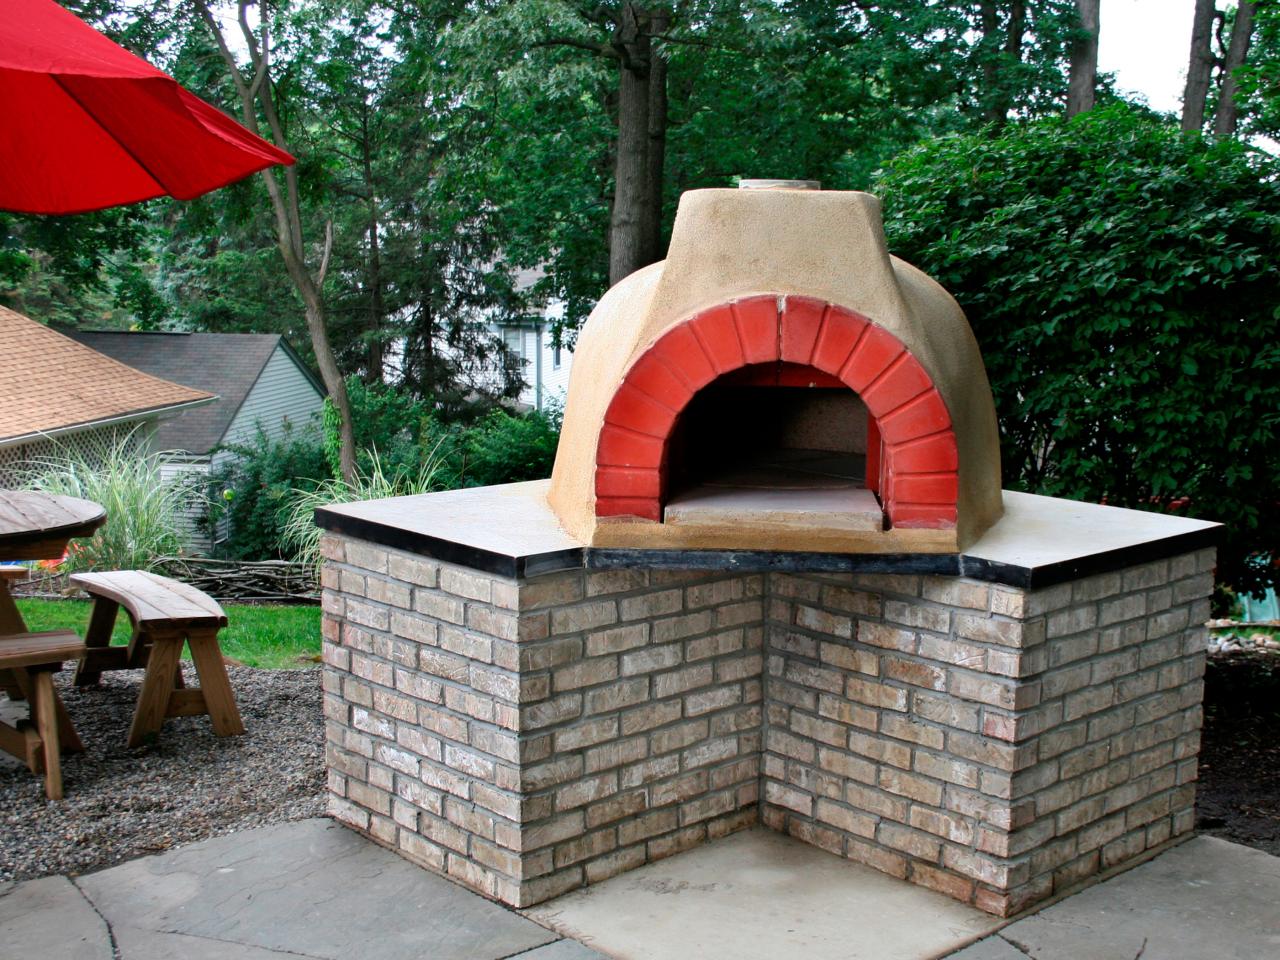 How to build a pizza oven brick